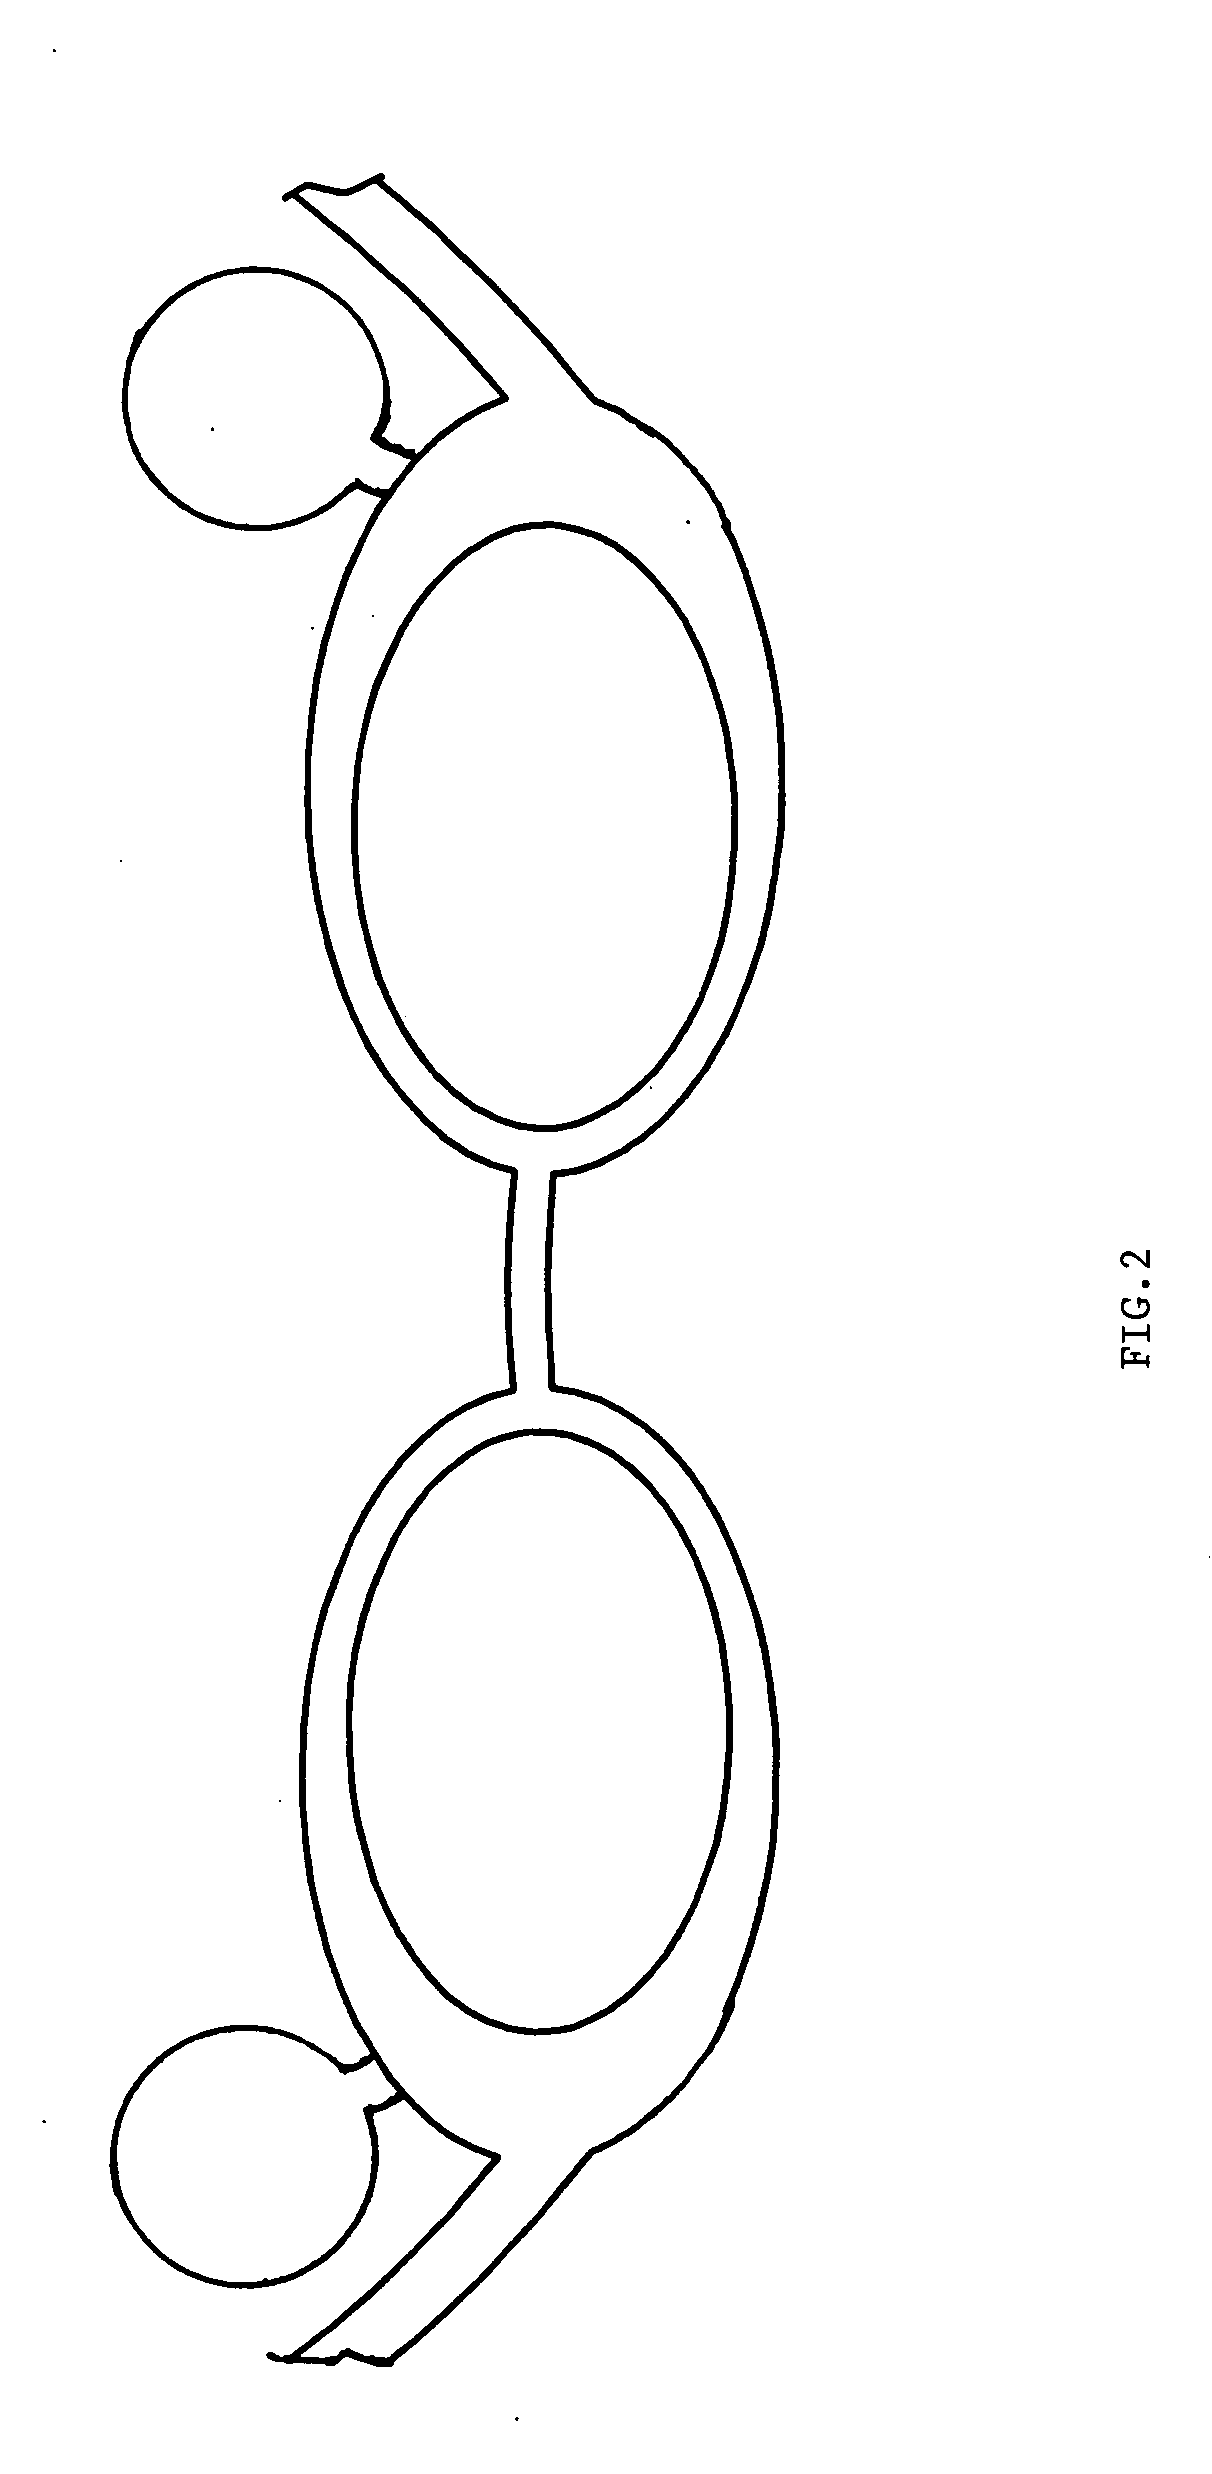 Method and apparatus for providing pressure compensation to underwater goggles